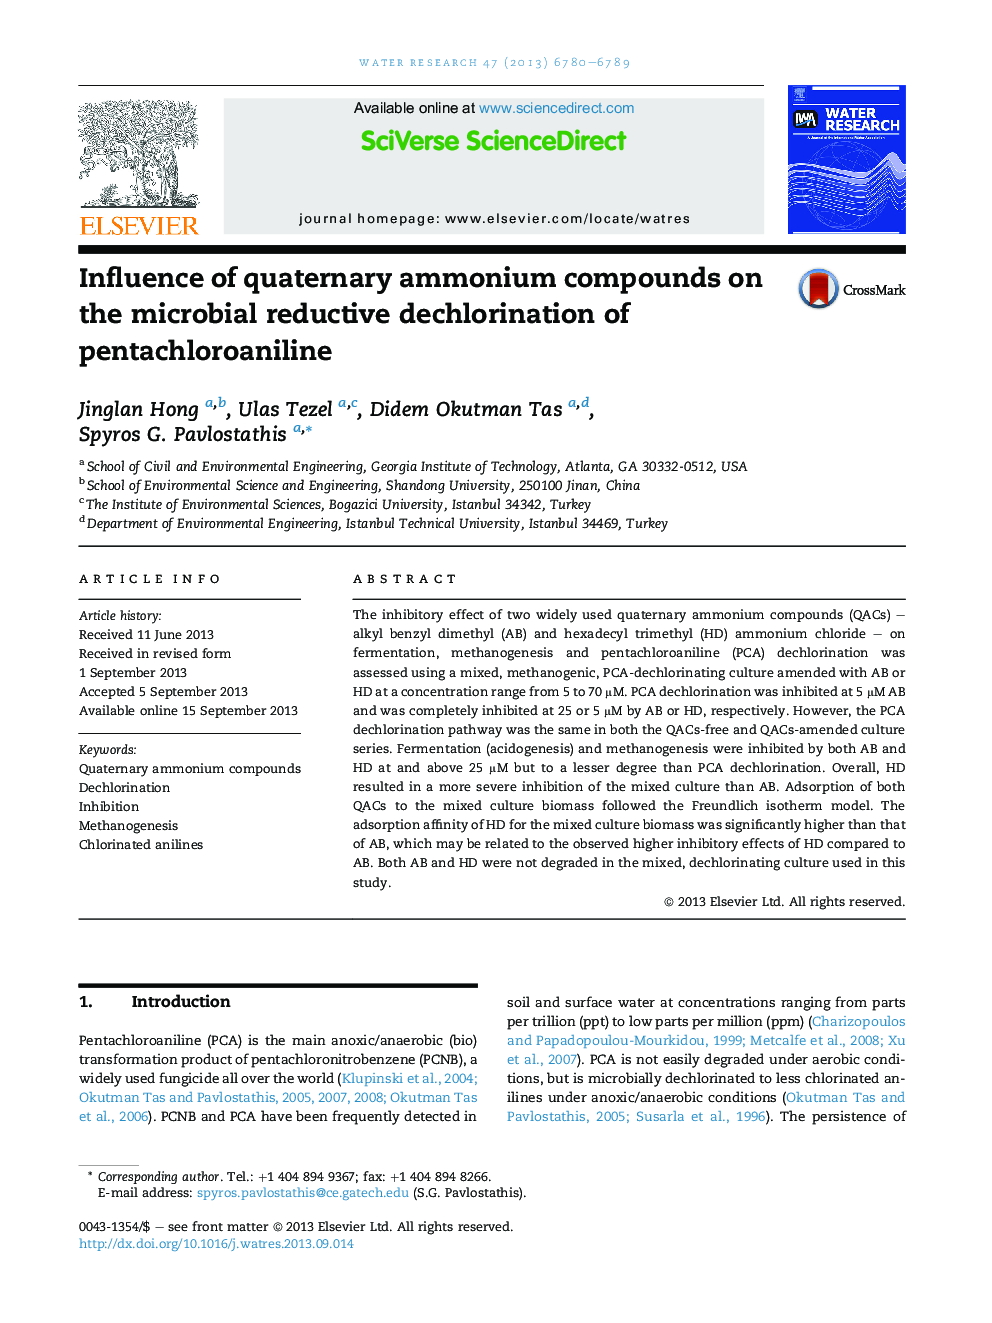 Influence of quaternary ammonium compounds on the microbial reductive dechlorination of pentachloroaniline